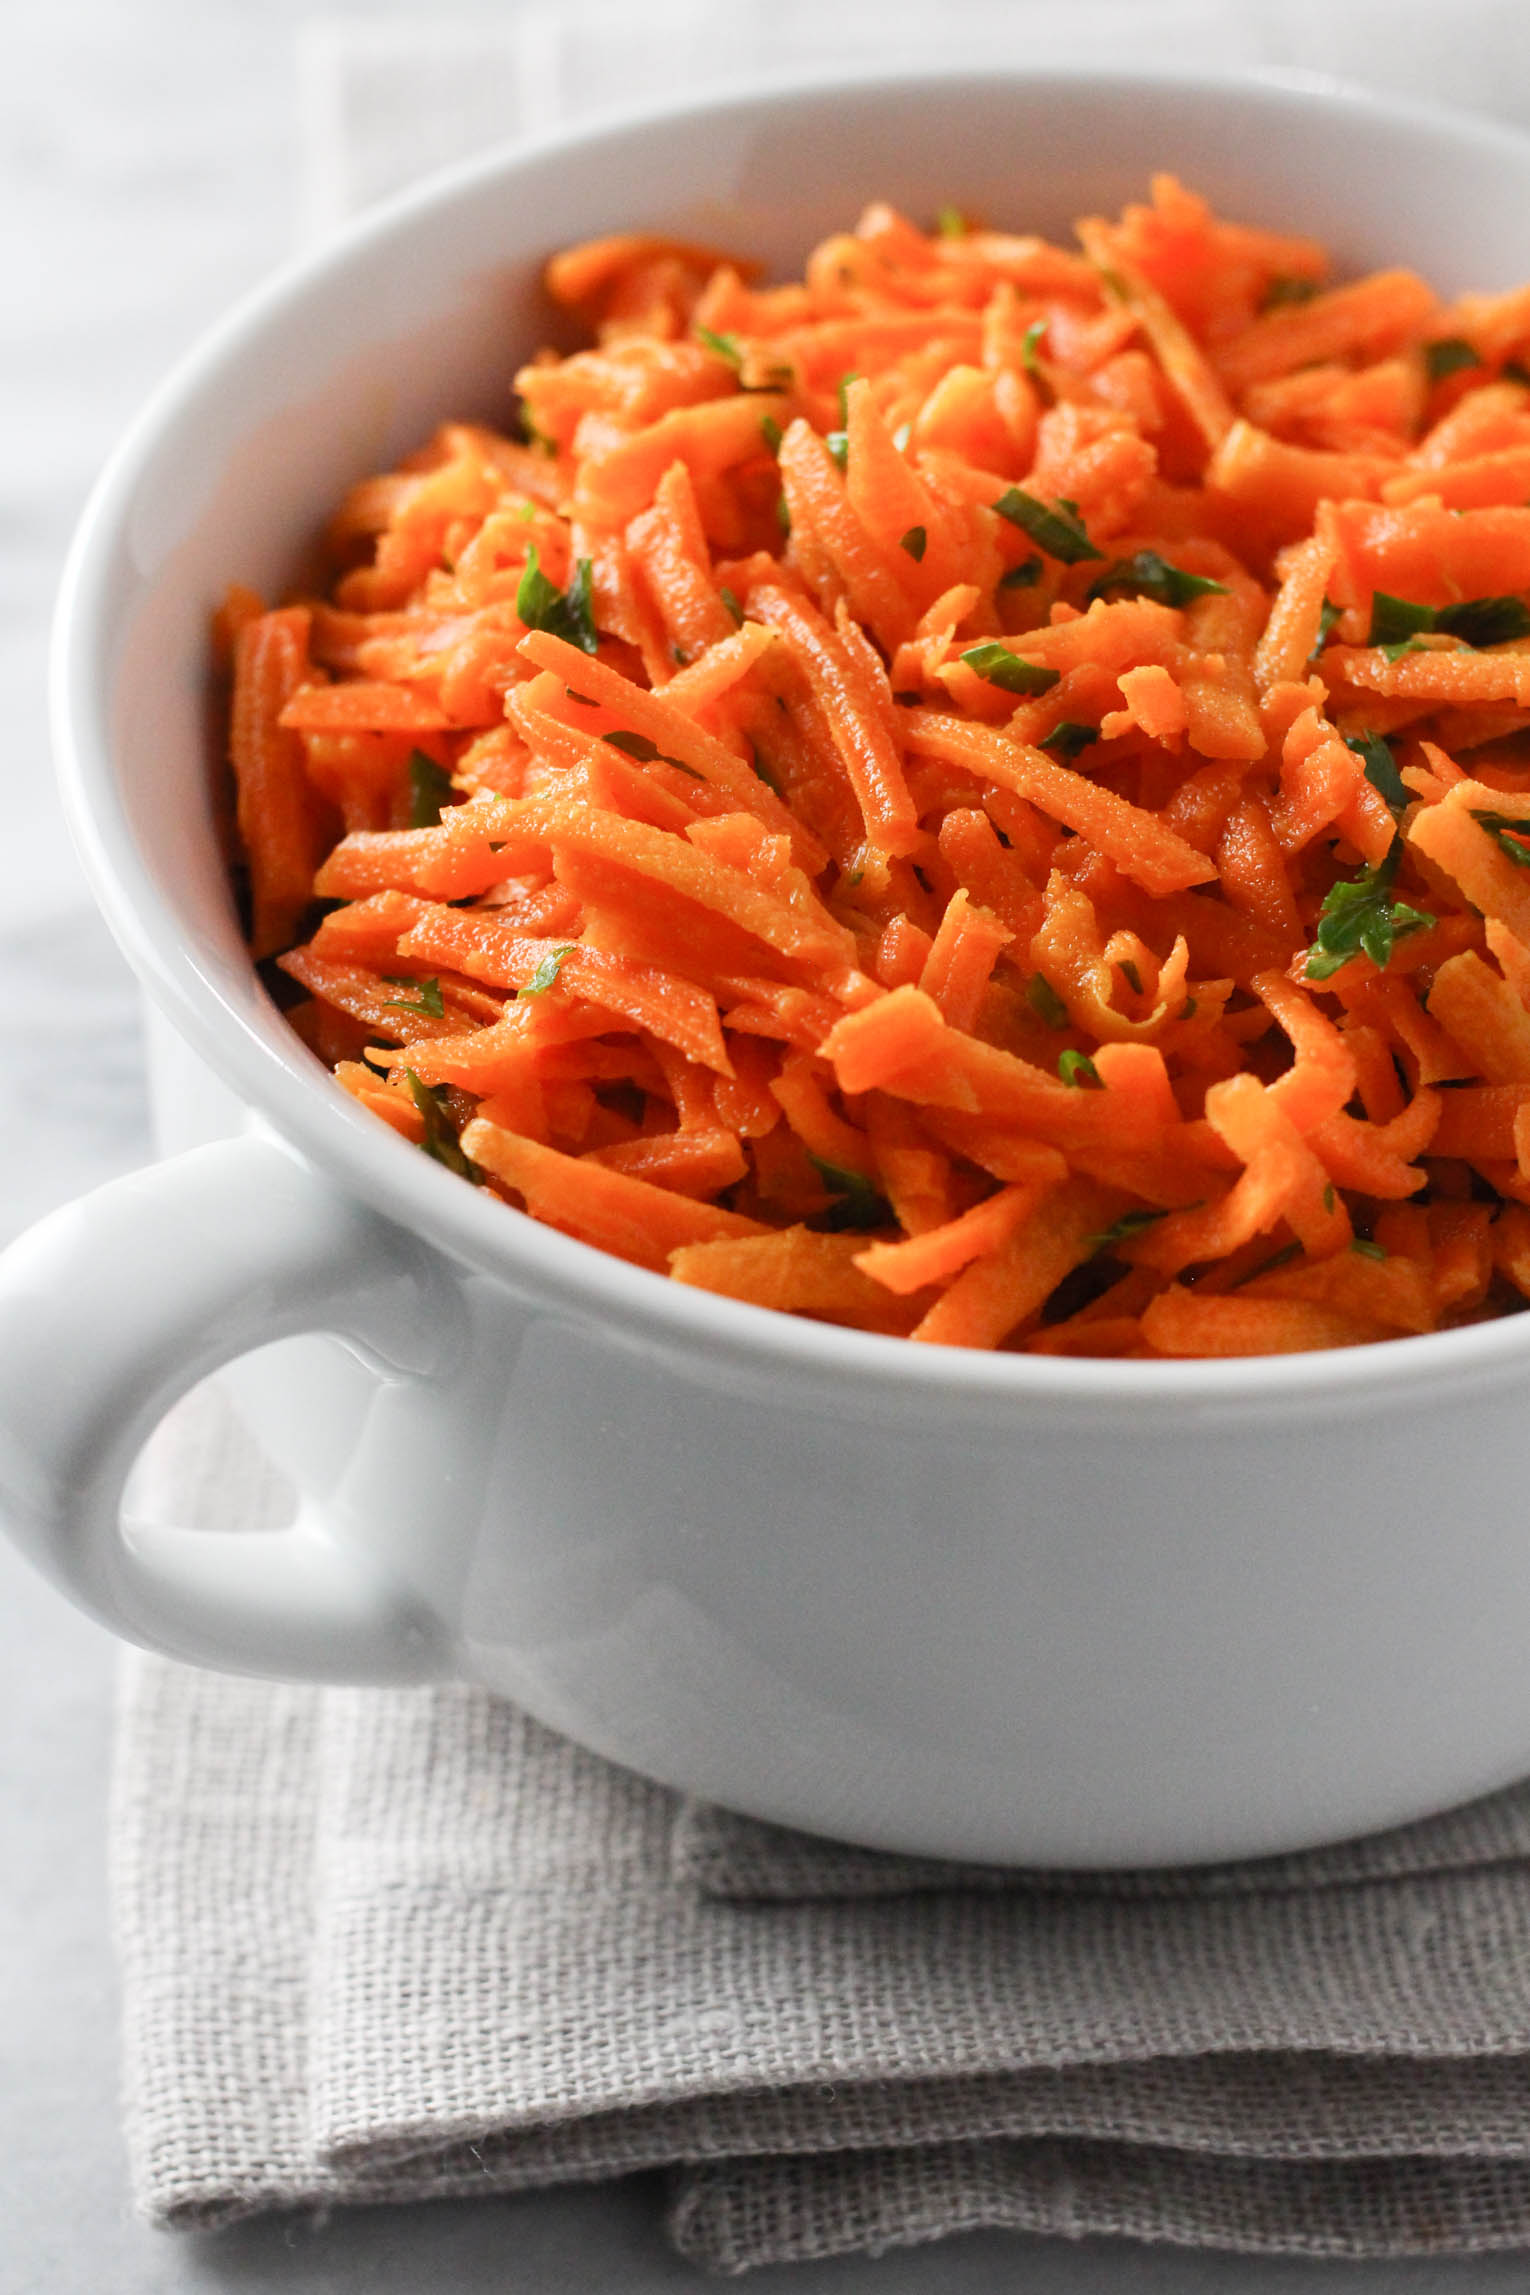 French grated carrot salad in a white bowl standing on a linen napkin.